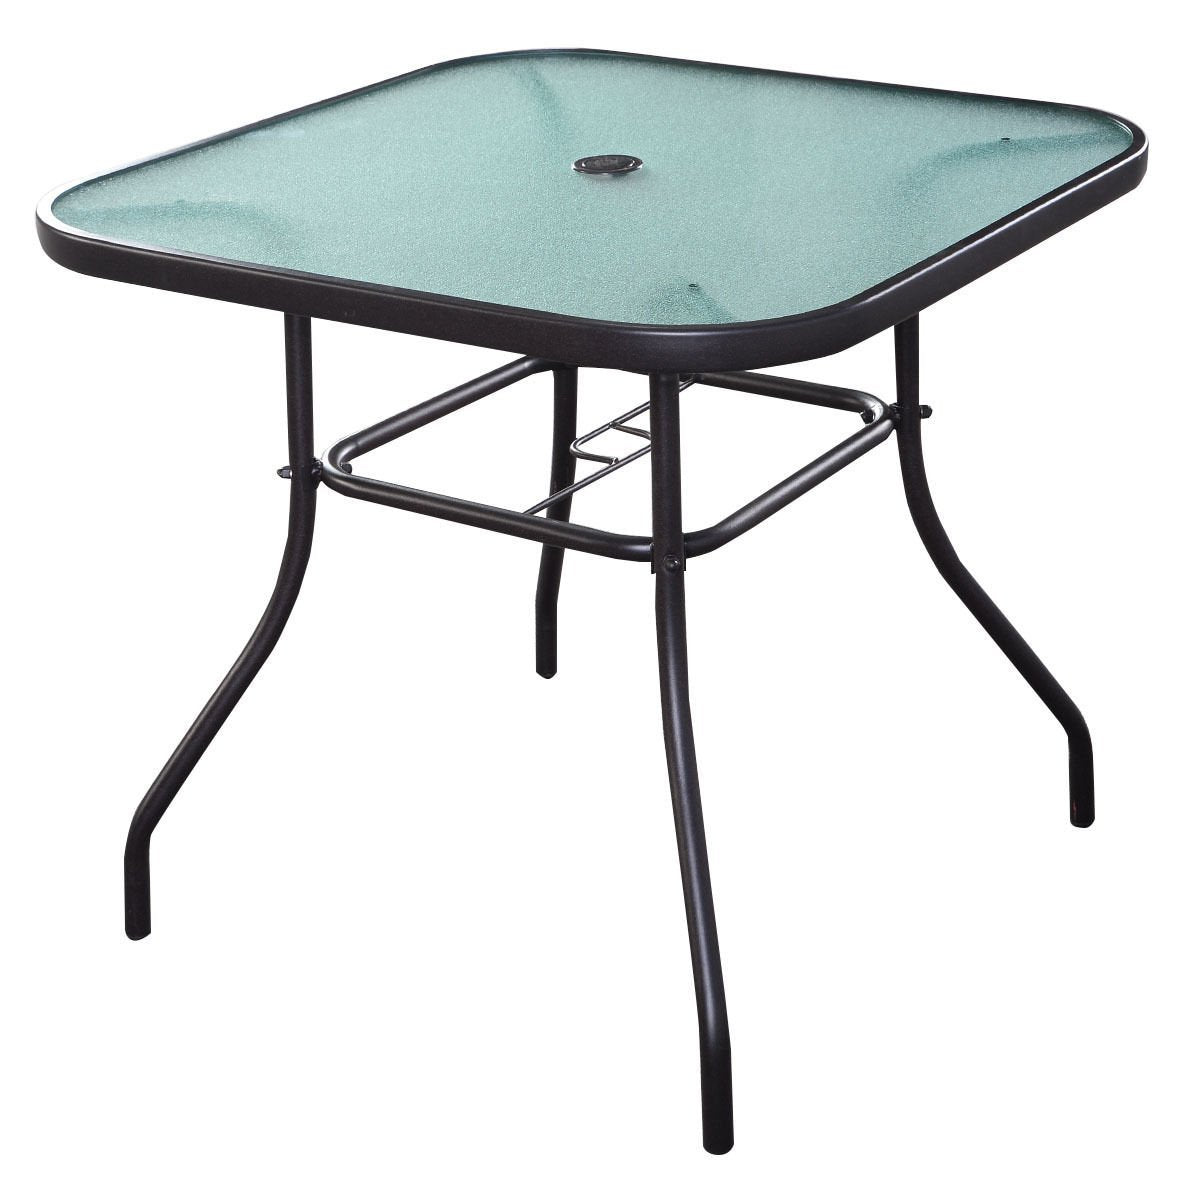 Giantex 32.5‘’ Outdoor Glass Table W/Tempered Tabletop and Umbrella Hole Square Outside Bar Table for Deck Garden Pool Outdoor Furniture Patio Table